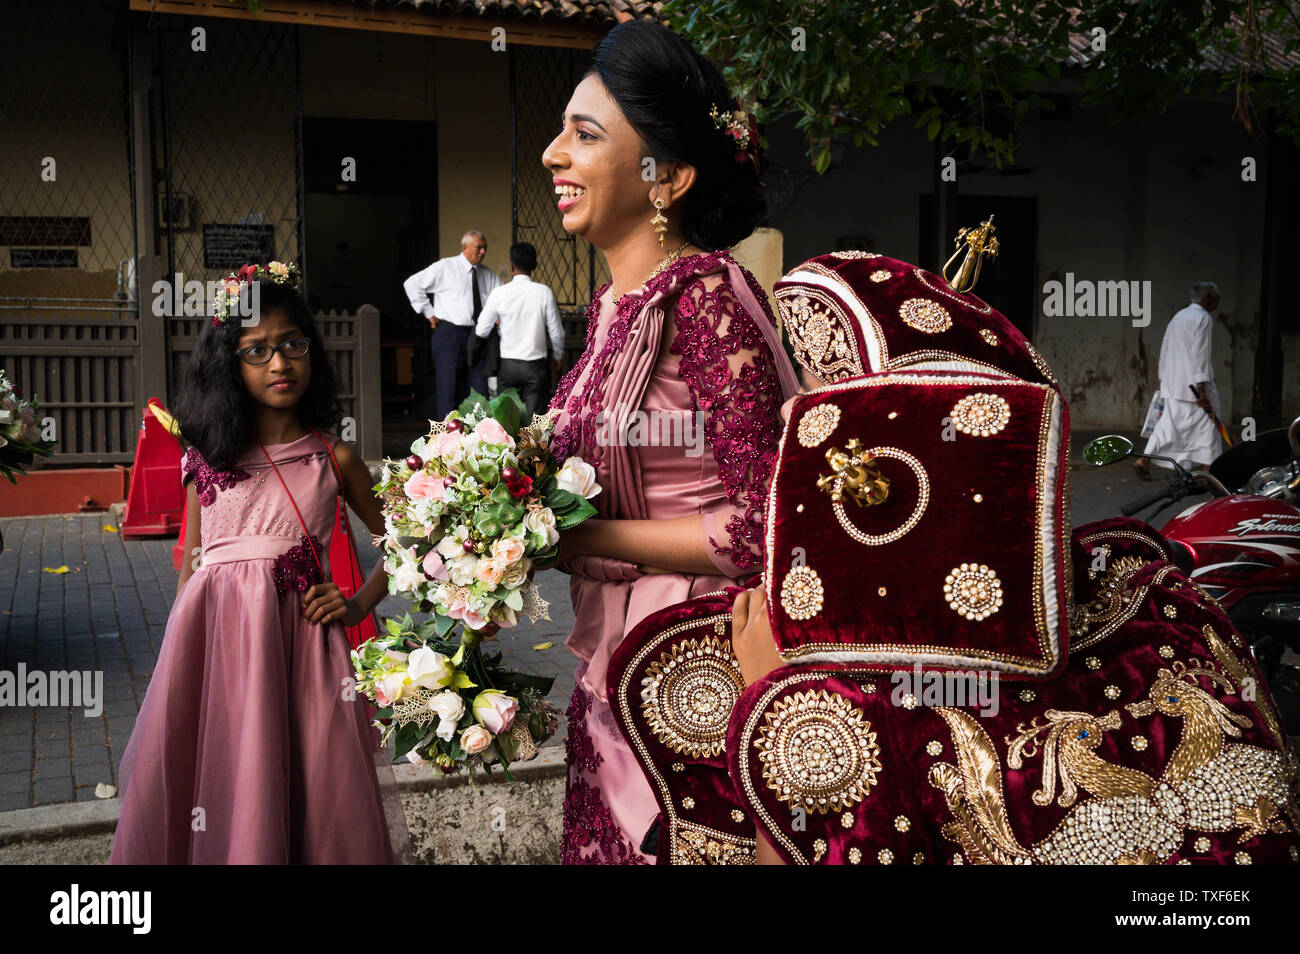 A woman and a girl raditionally dressed for the wedding, Galle, Sri Lanka Stock Photo